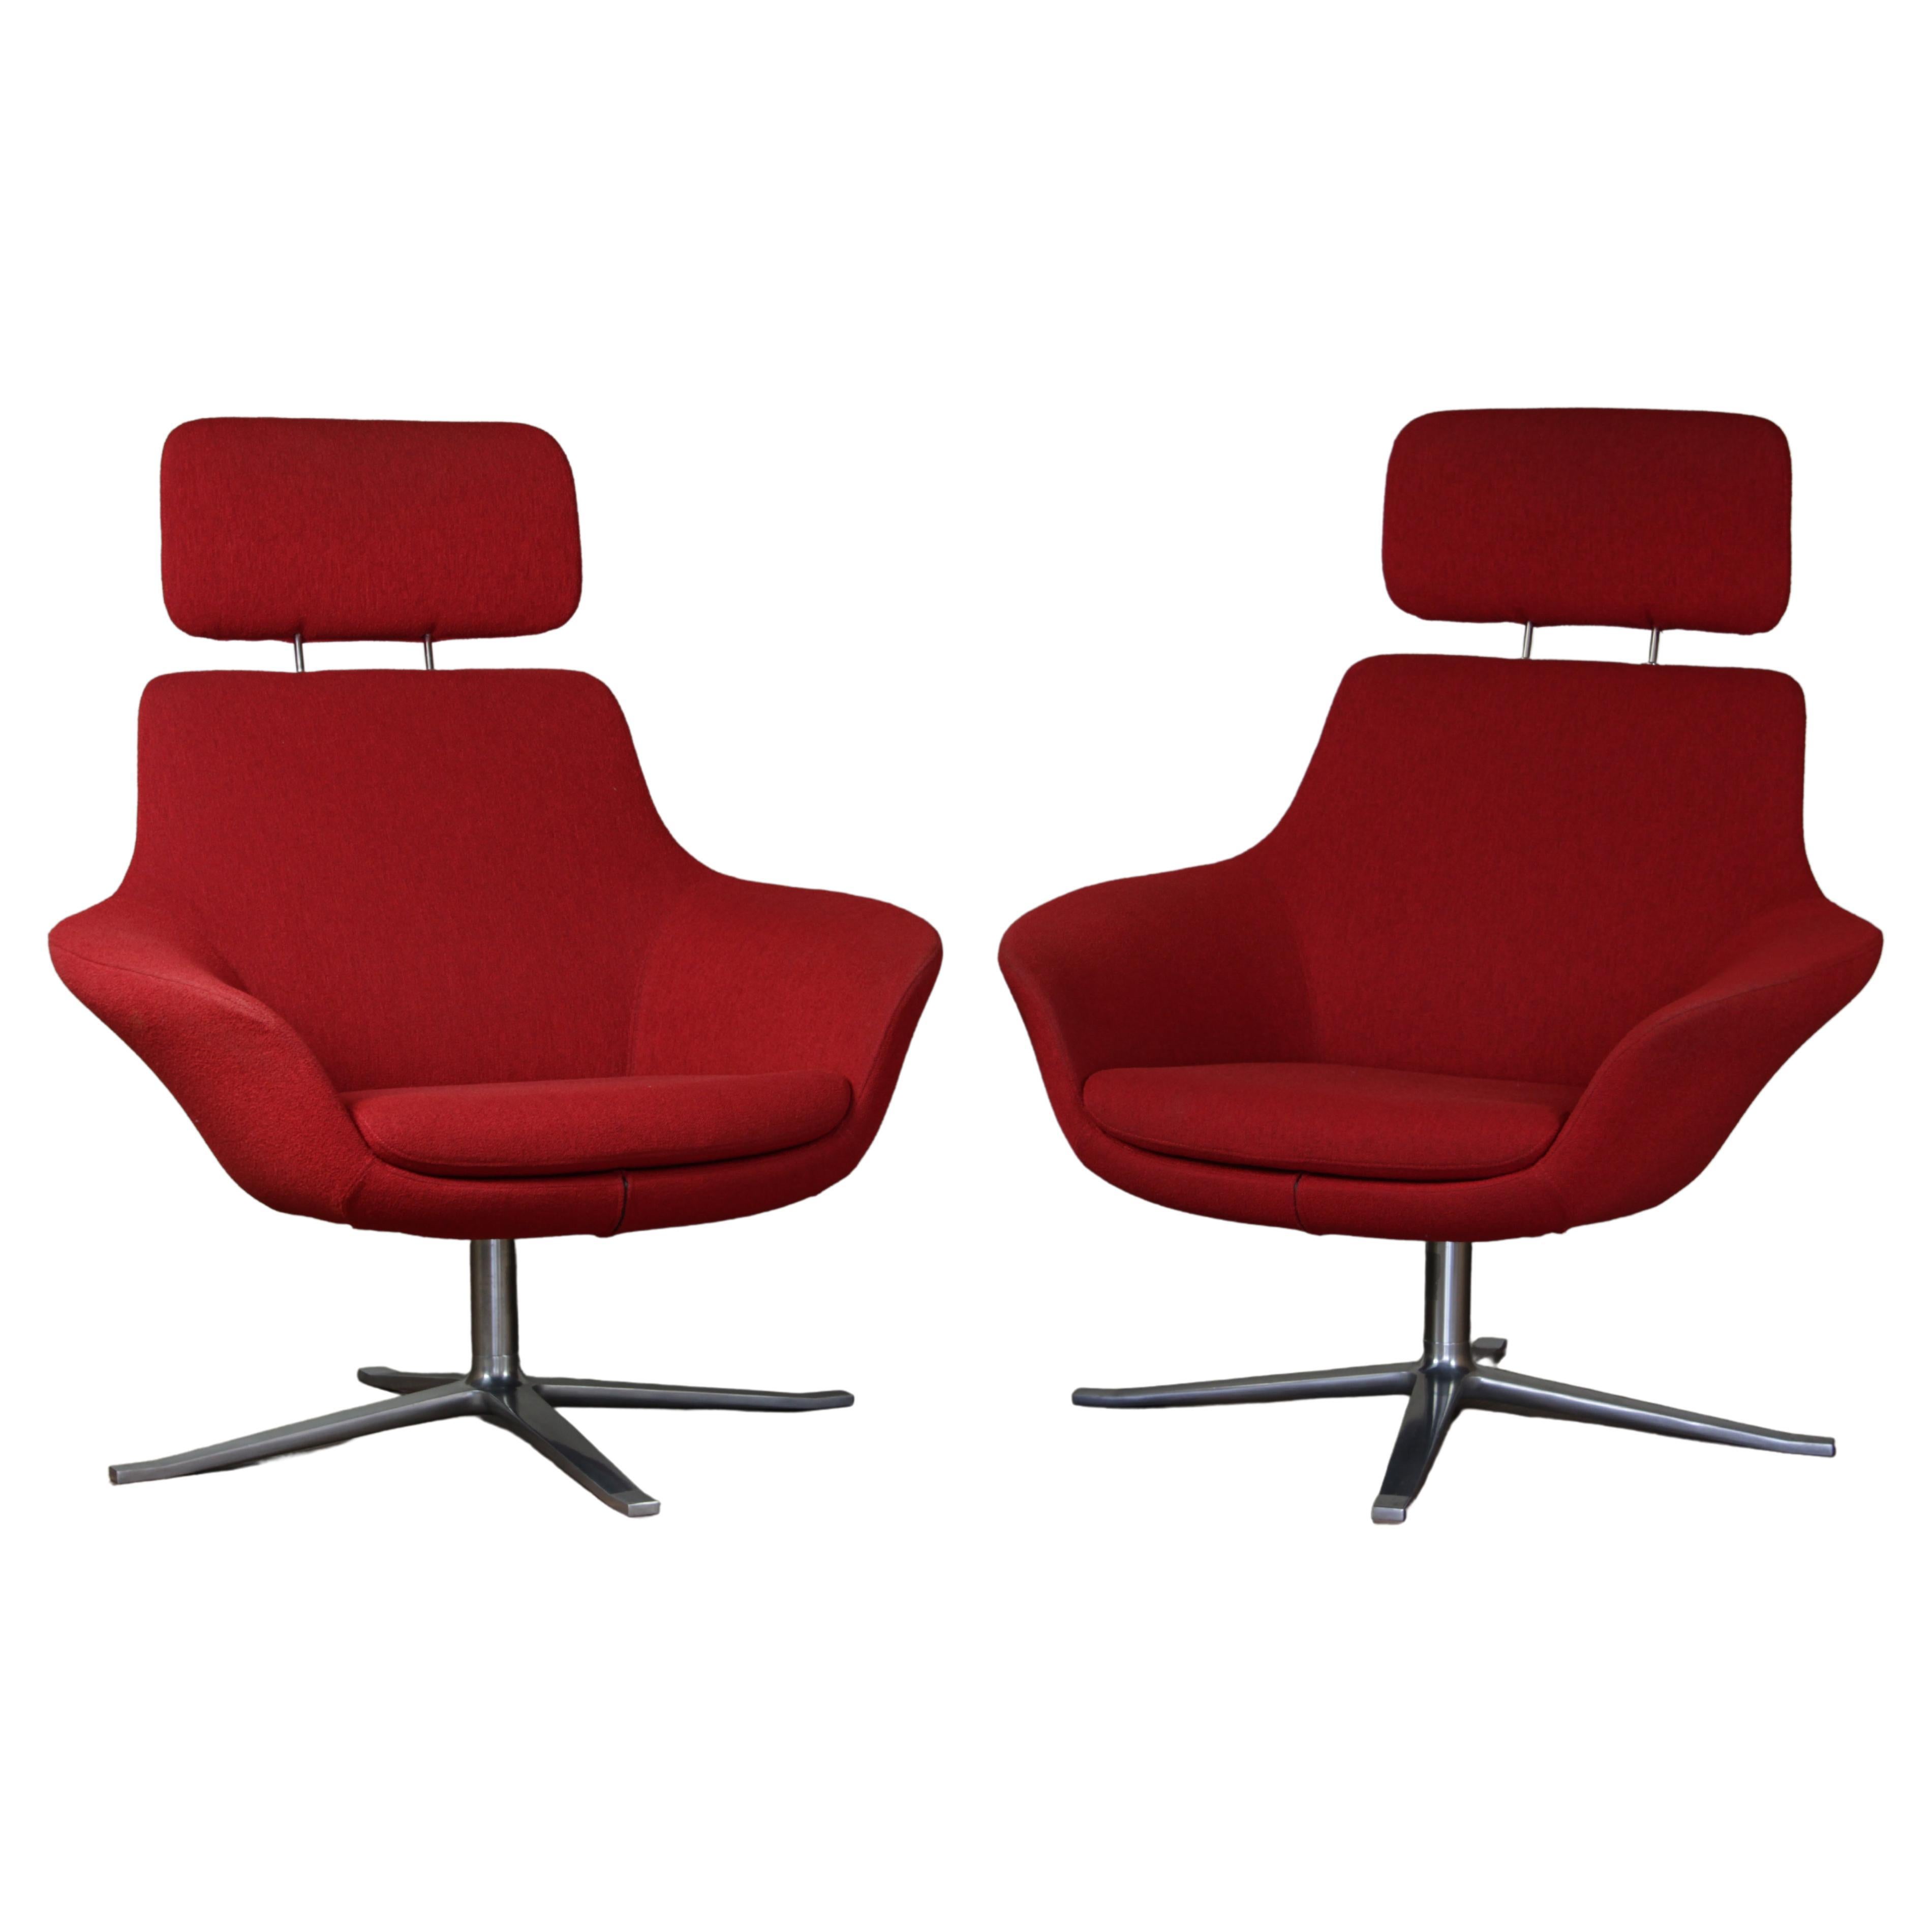 Pair of Modern Oscar Red Armchairs by Pearson Lloyd for Walter Knoll